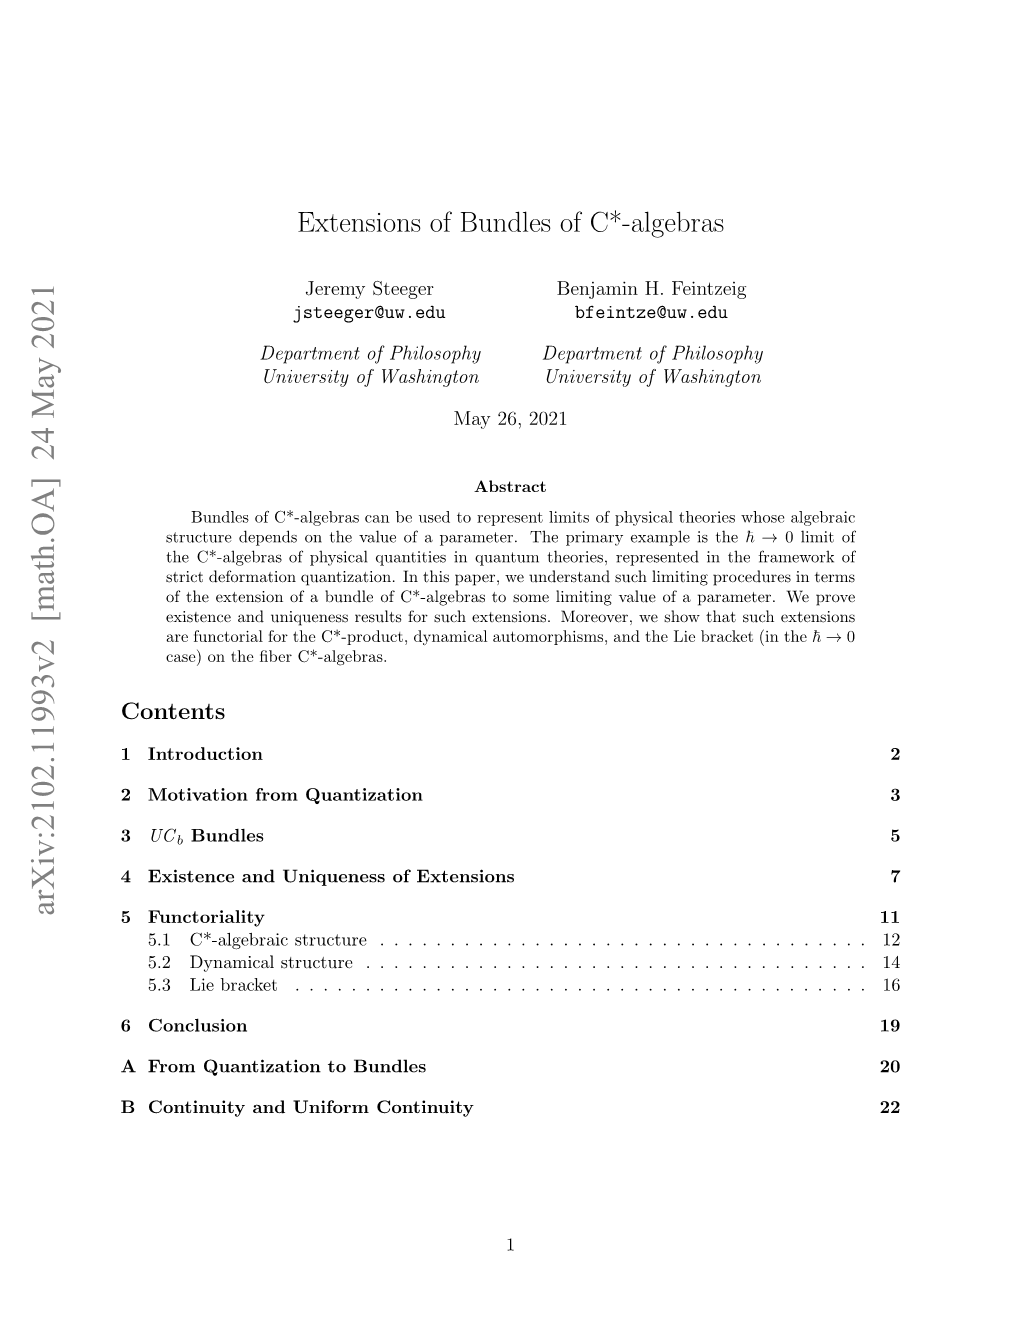 Extensions of Bundles of C*-Algebras Are Functo- Rial